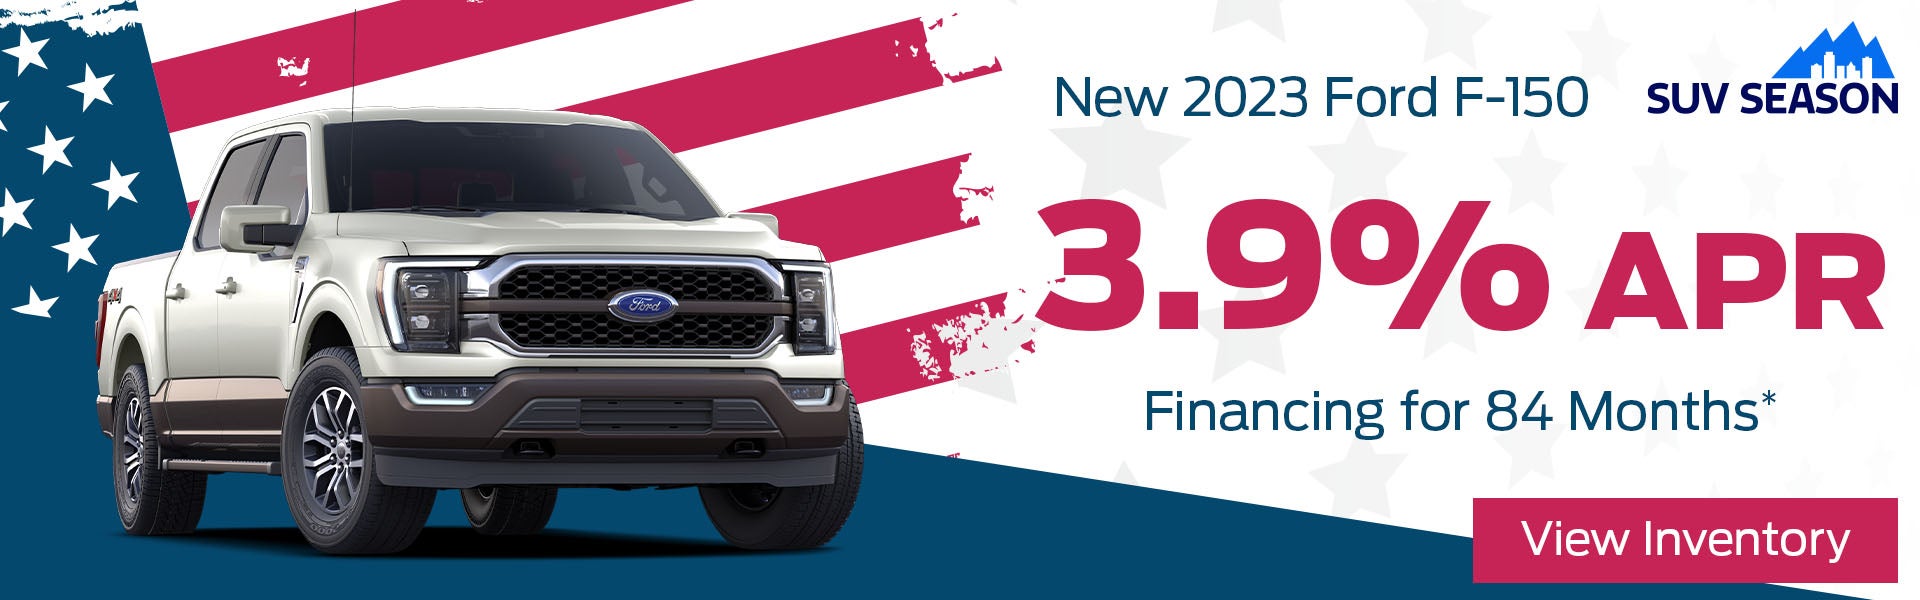 New 2023 Ford F-150 